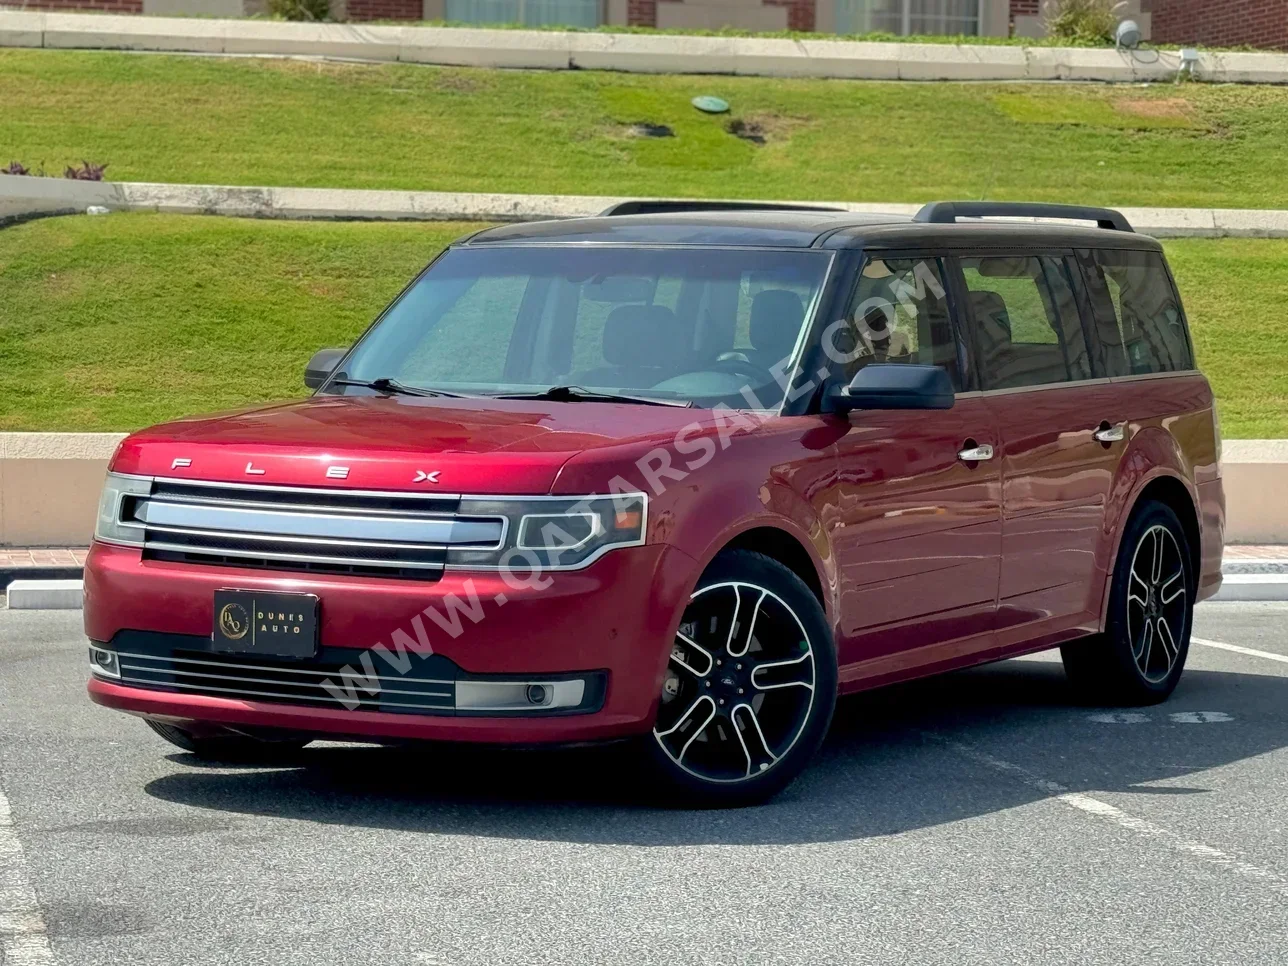 Ford  FLEX  Limited  2015  Automatic  120,000 Km  6 Cylinder  All Wheel Drive (AWD)  SUV  Red